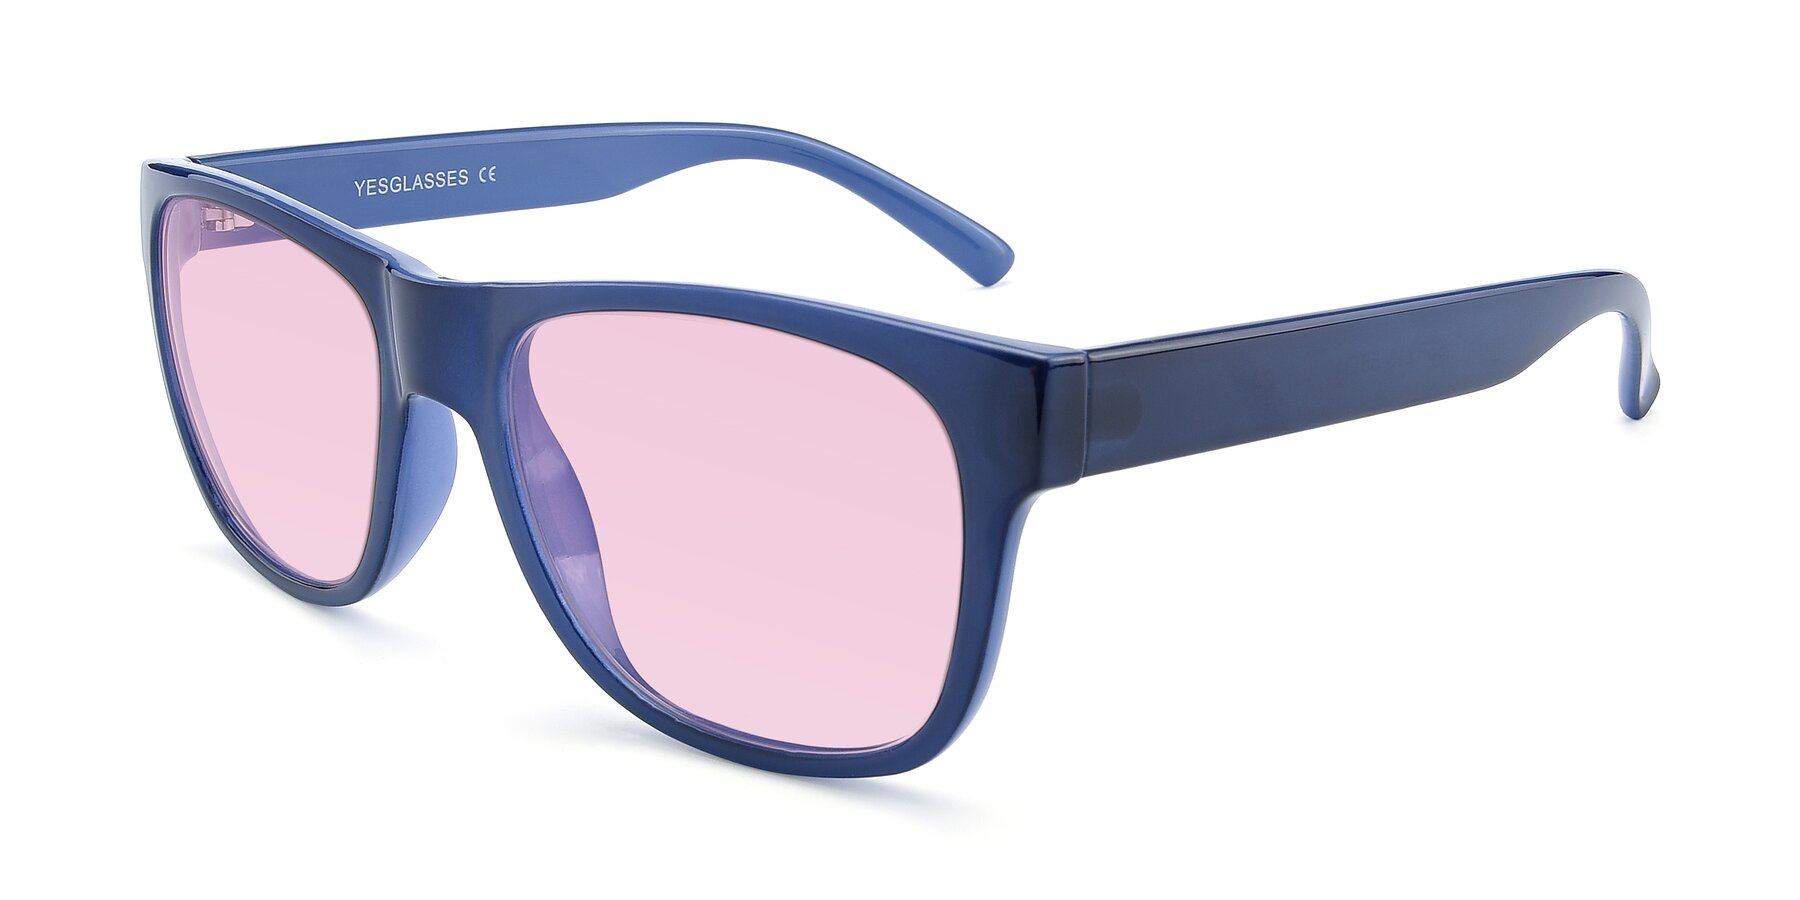 Angle of SSR213 in Blue with Light Pink Tinted Lenses